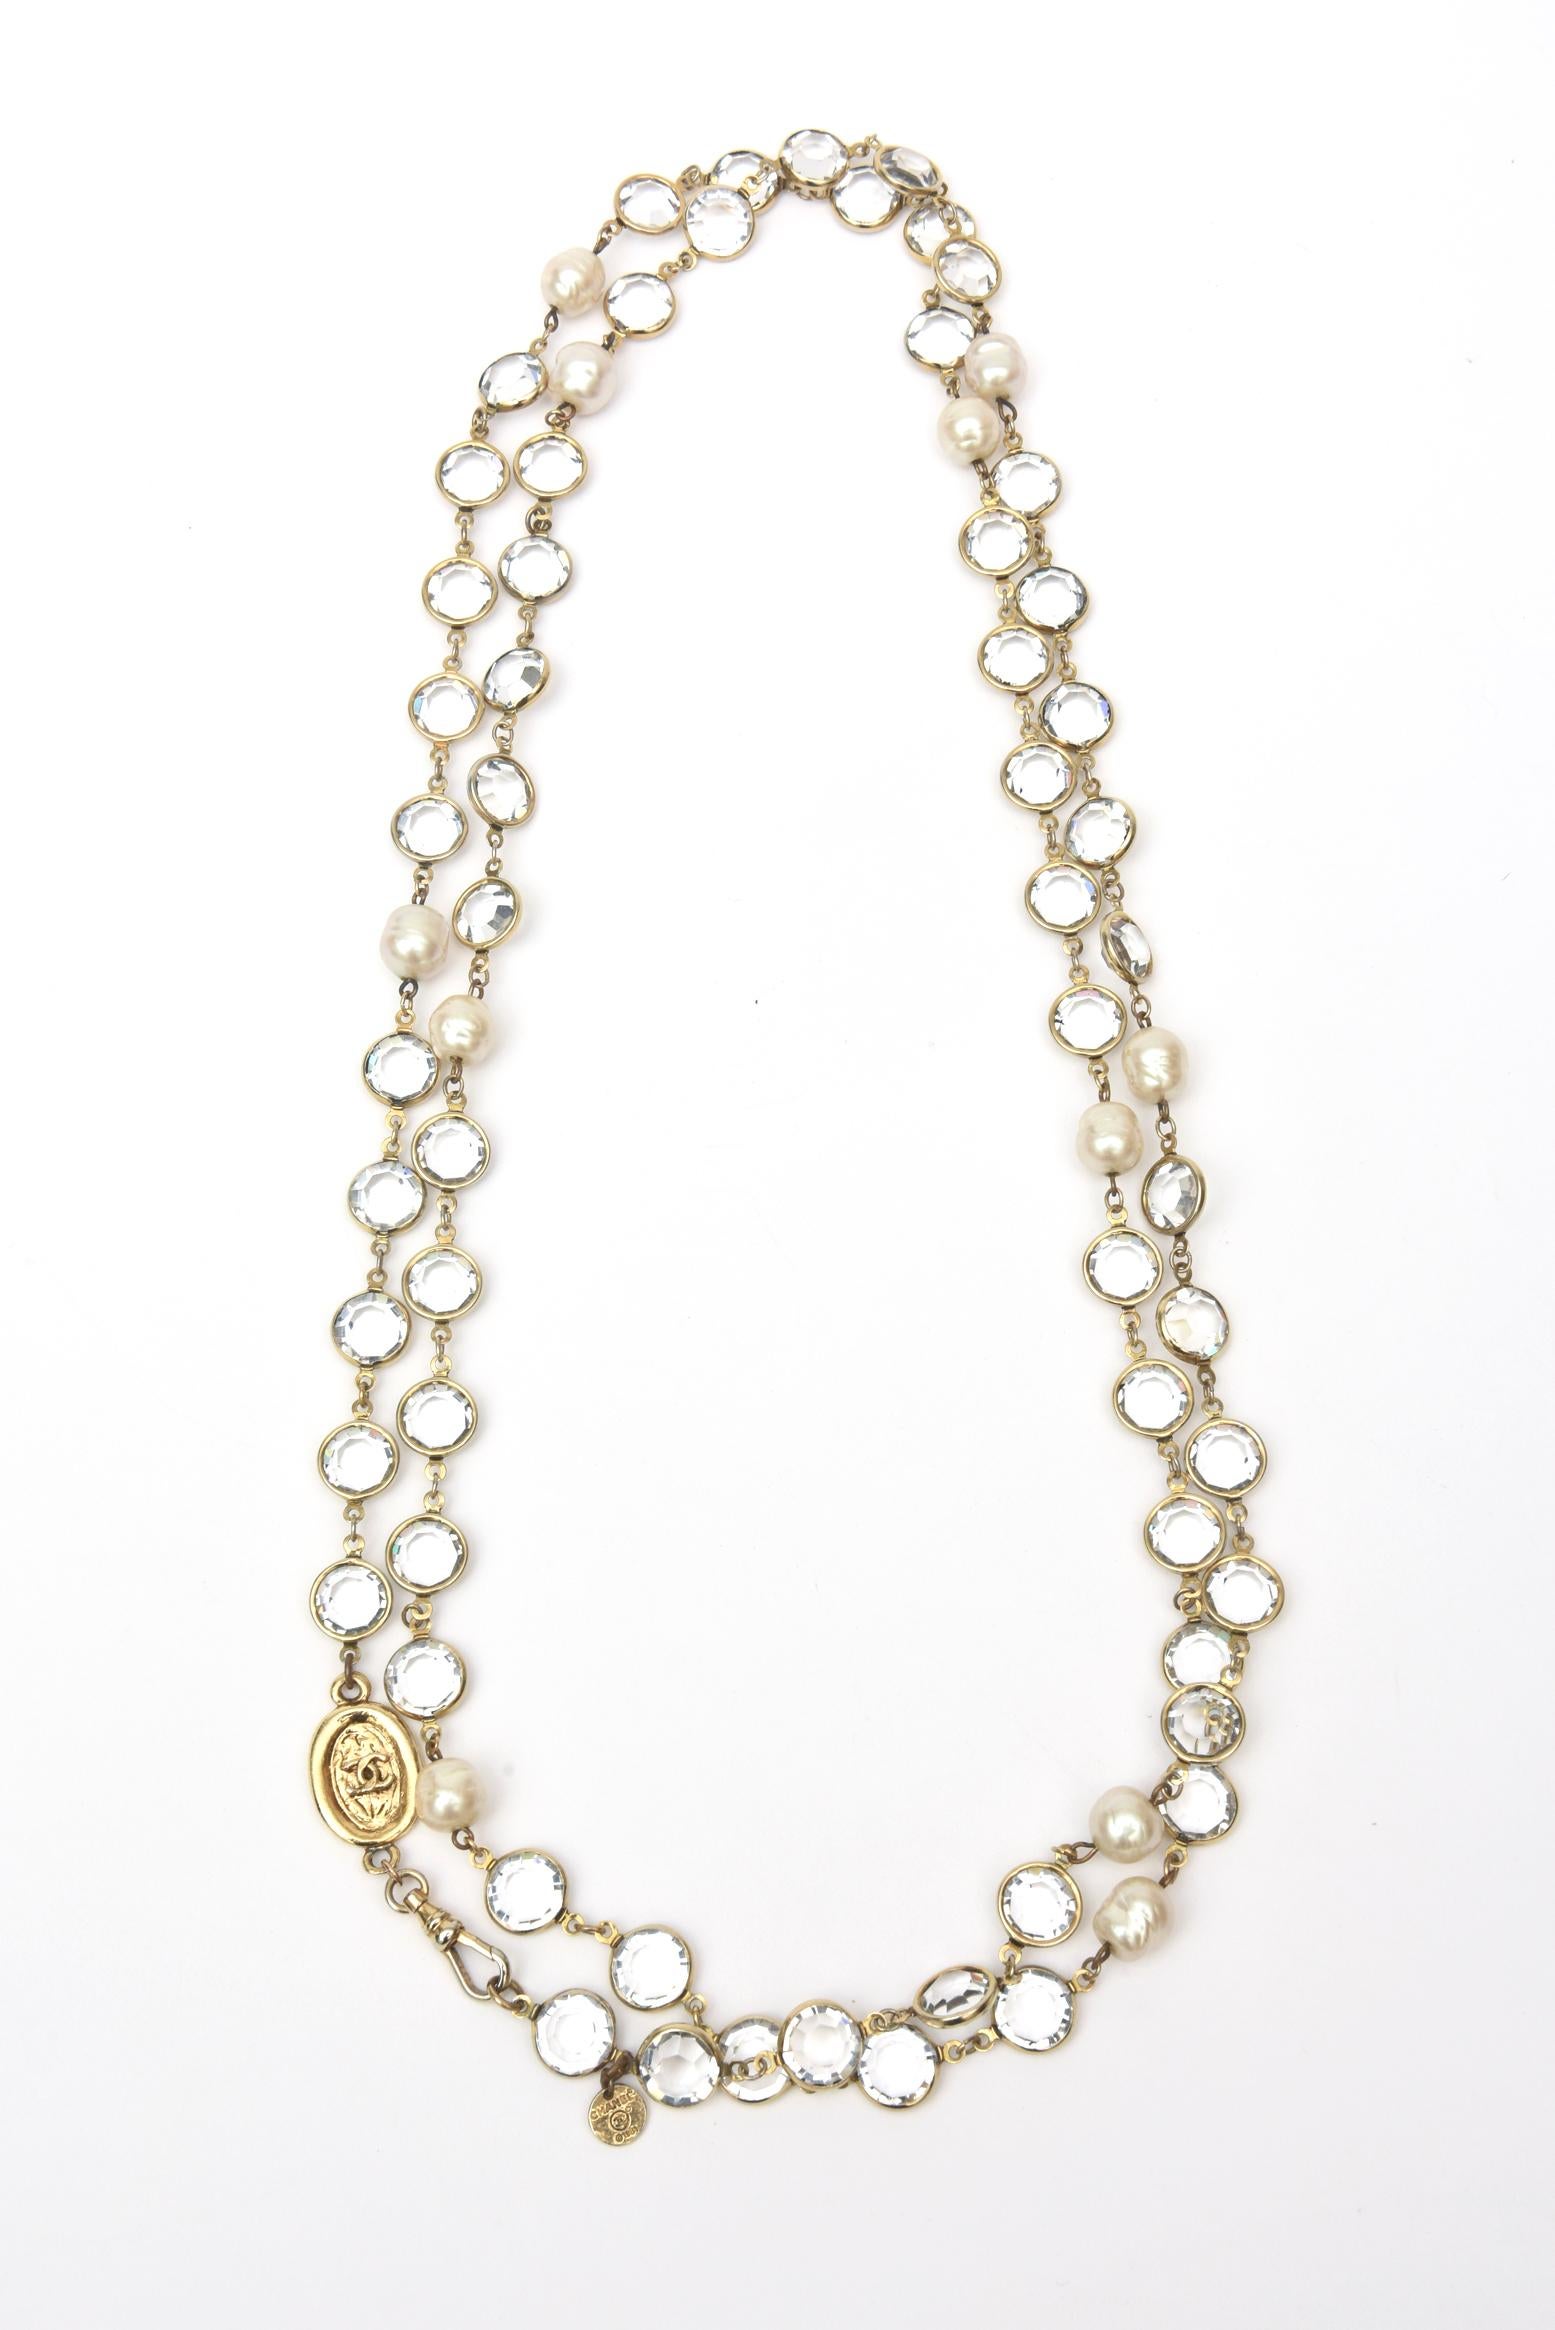 This versatile and classic signed vintage Chanel faux pearl and bevel set crystal long necklace can be wrapped twice over and even three times to make more of a wrap choker necklace. It can also be staggered at different lengths when wrapped twice